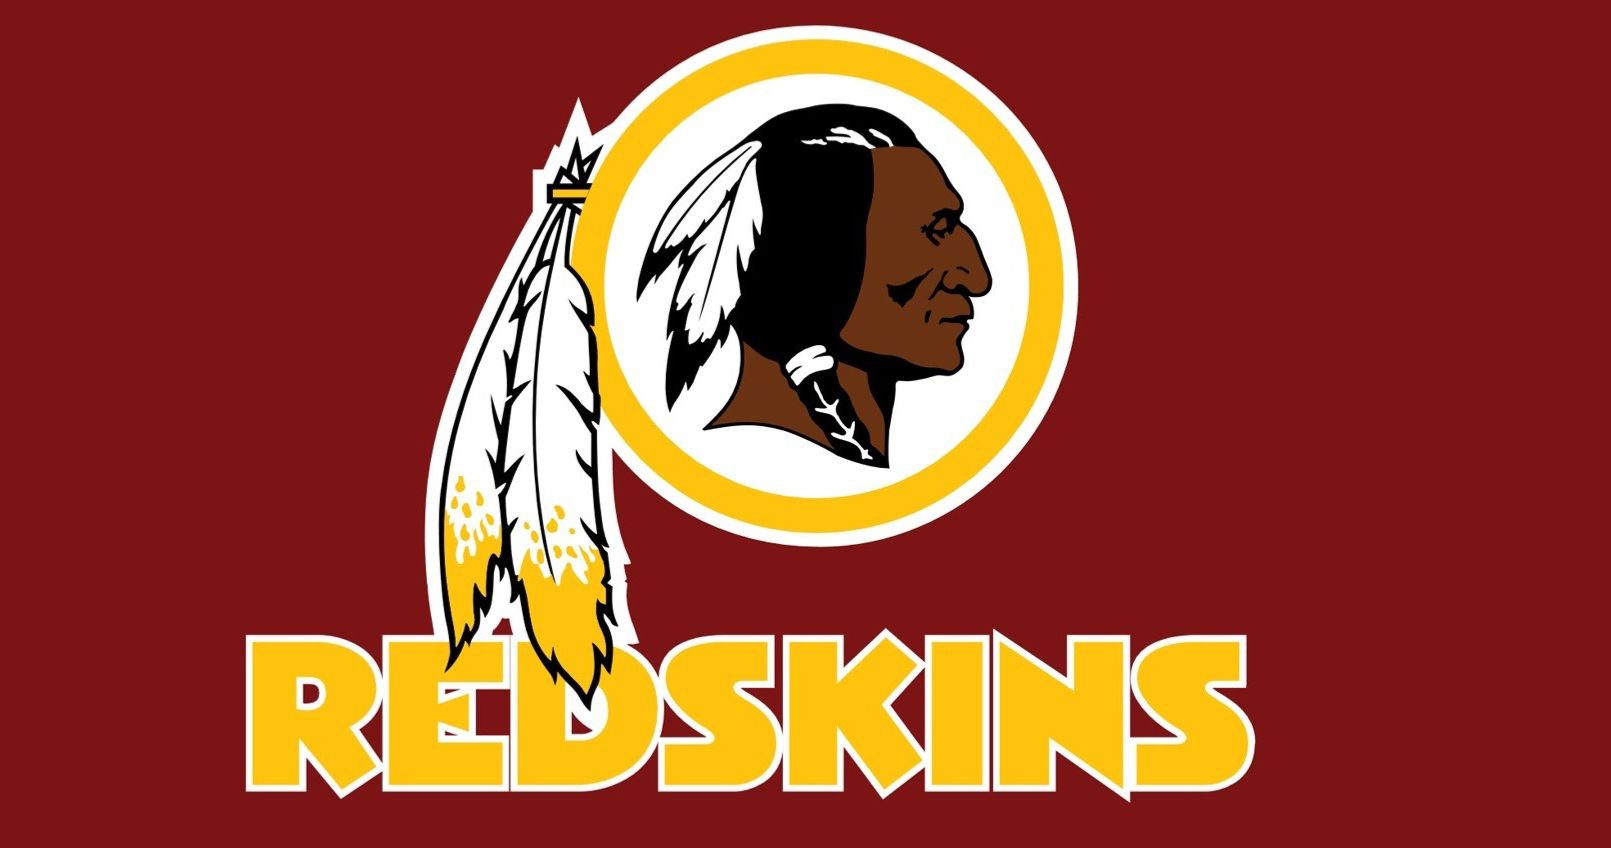 Washington Redskins Get a Very Generic Temporary Name Until a New One Is Chosen